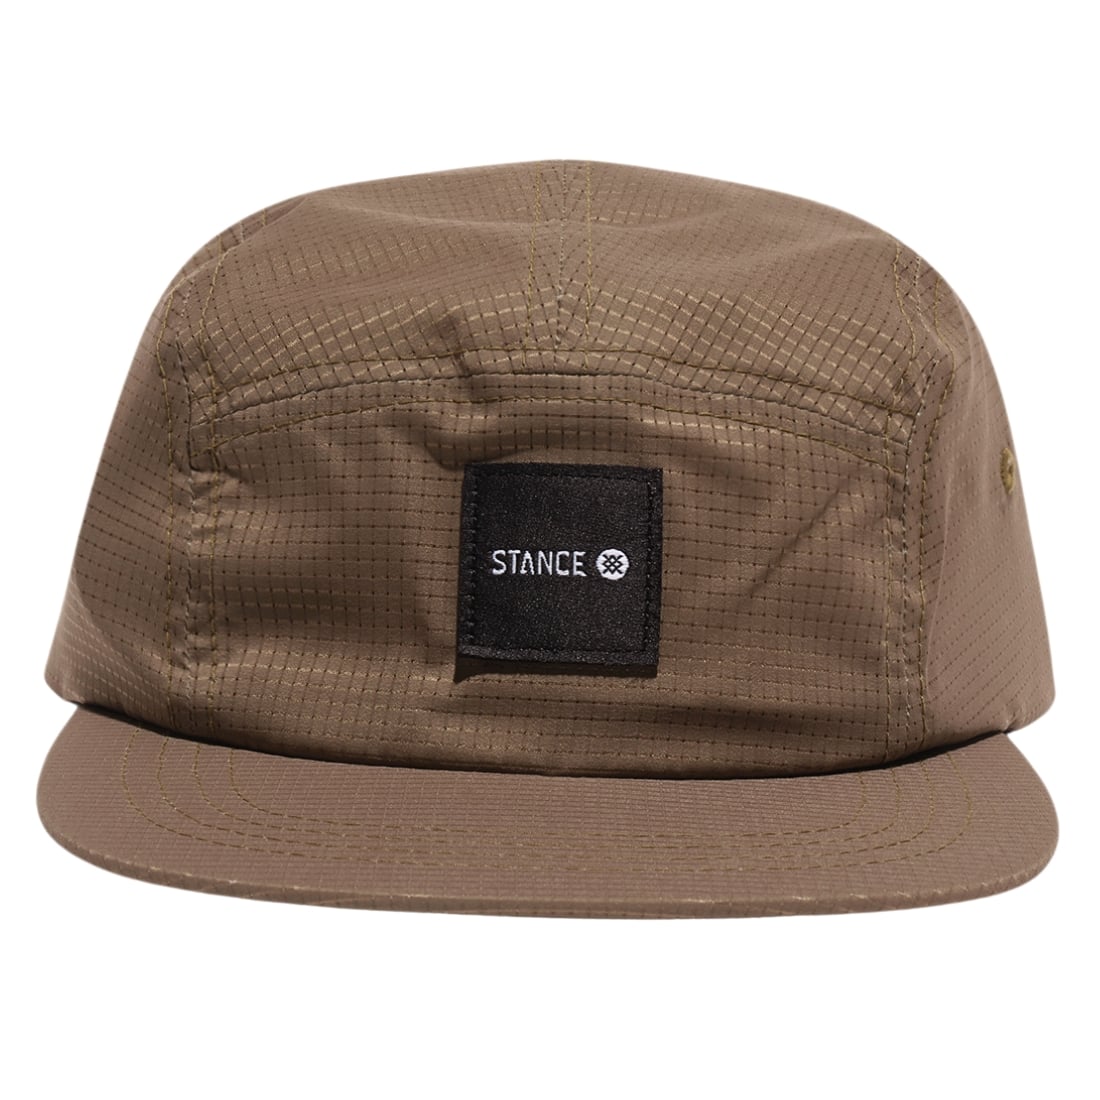 Stance Kinetic Adjustable Cap - Brown - 5 Panel Cap by Stance One Size